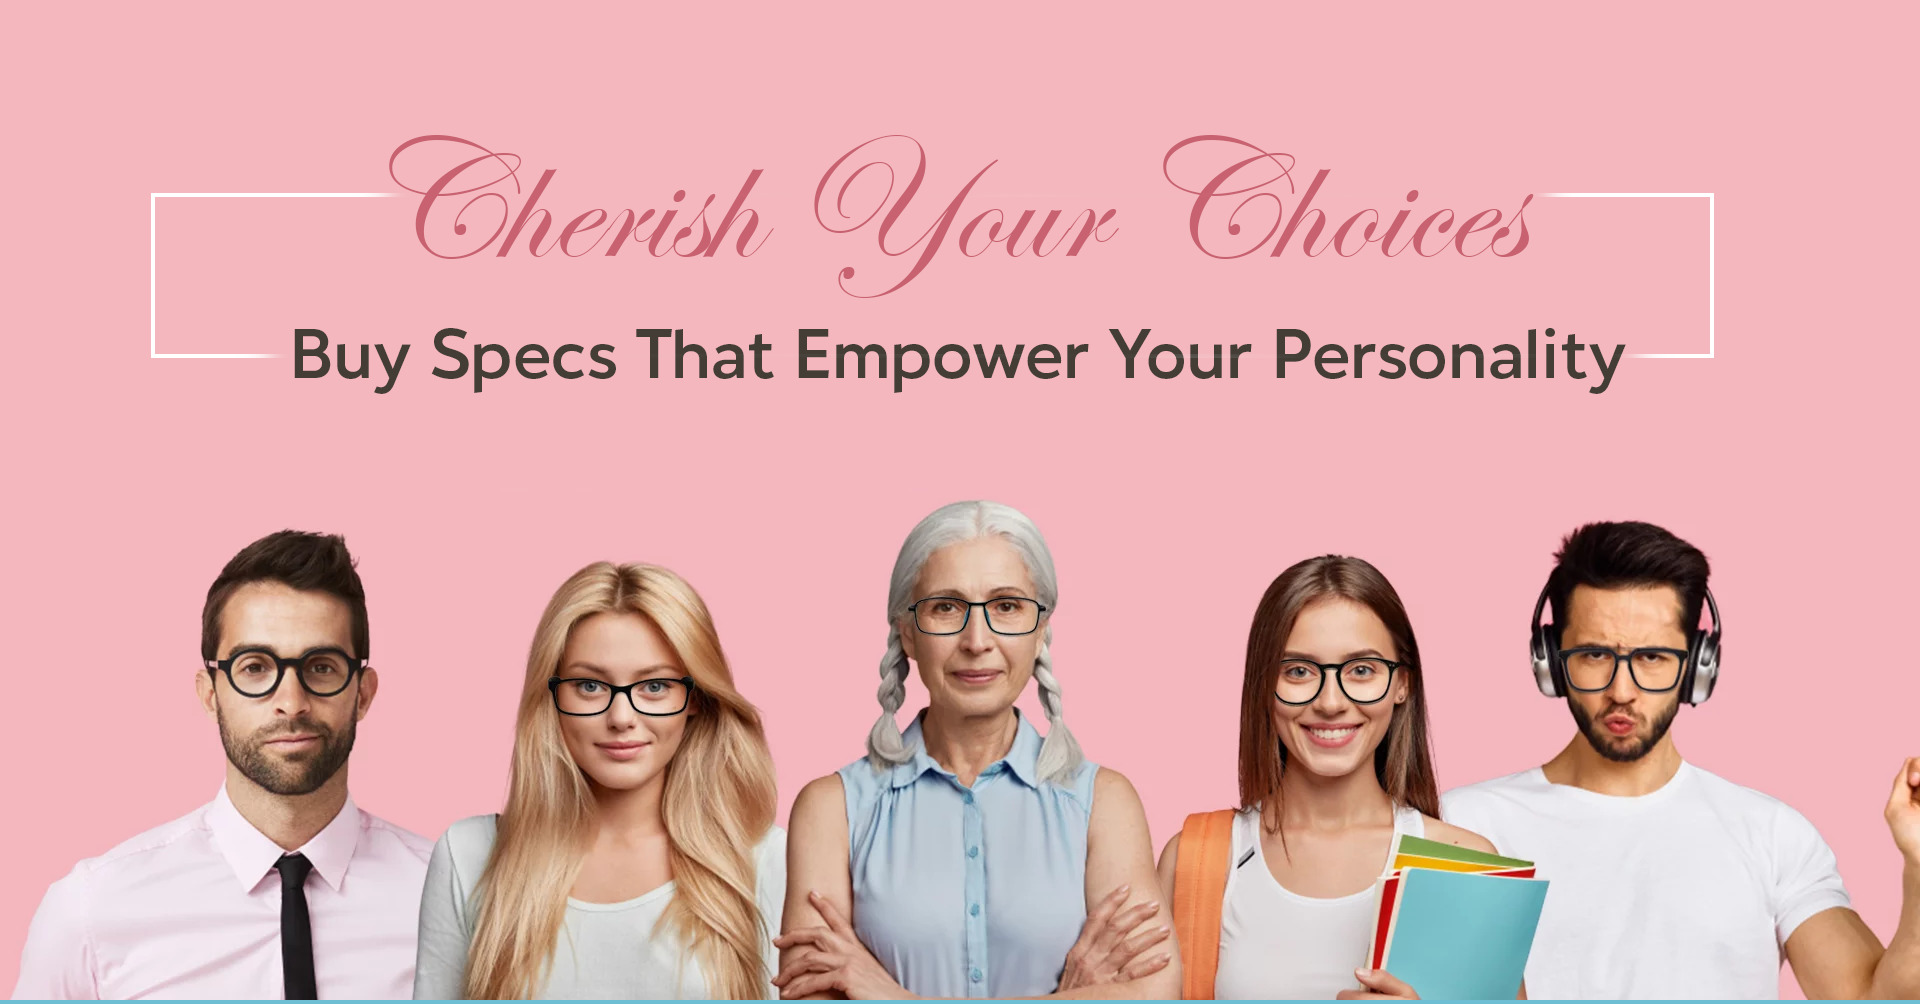 CHERISH YOUR CHOICES: BUY SPECS THAT EMPOWER YOUR PERSONALITY